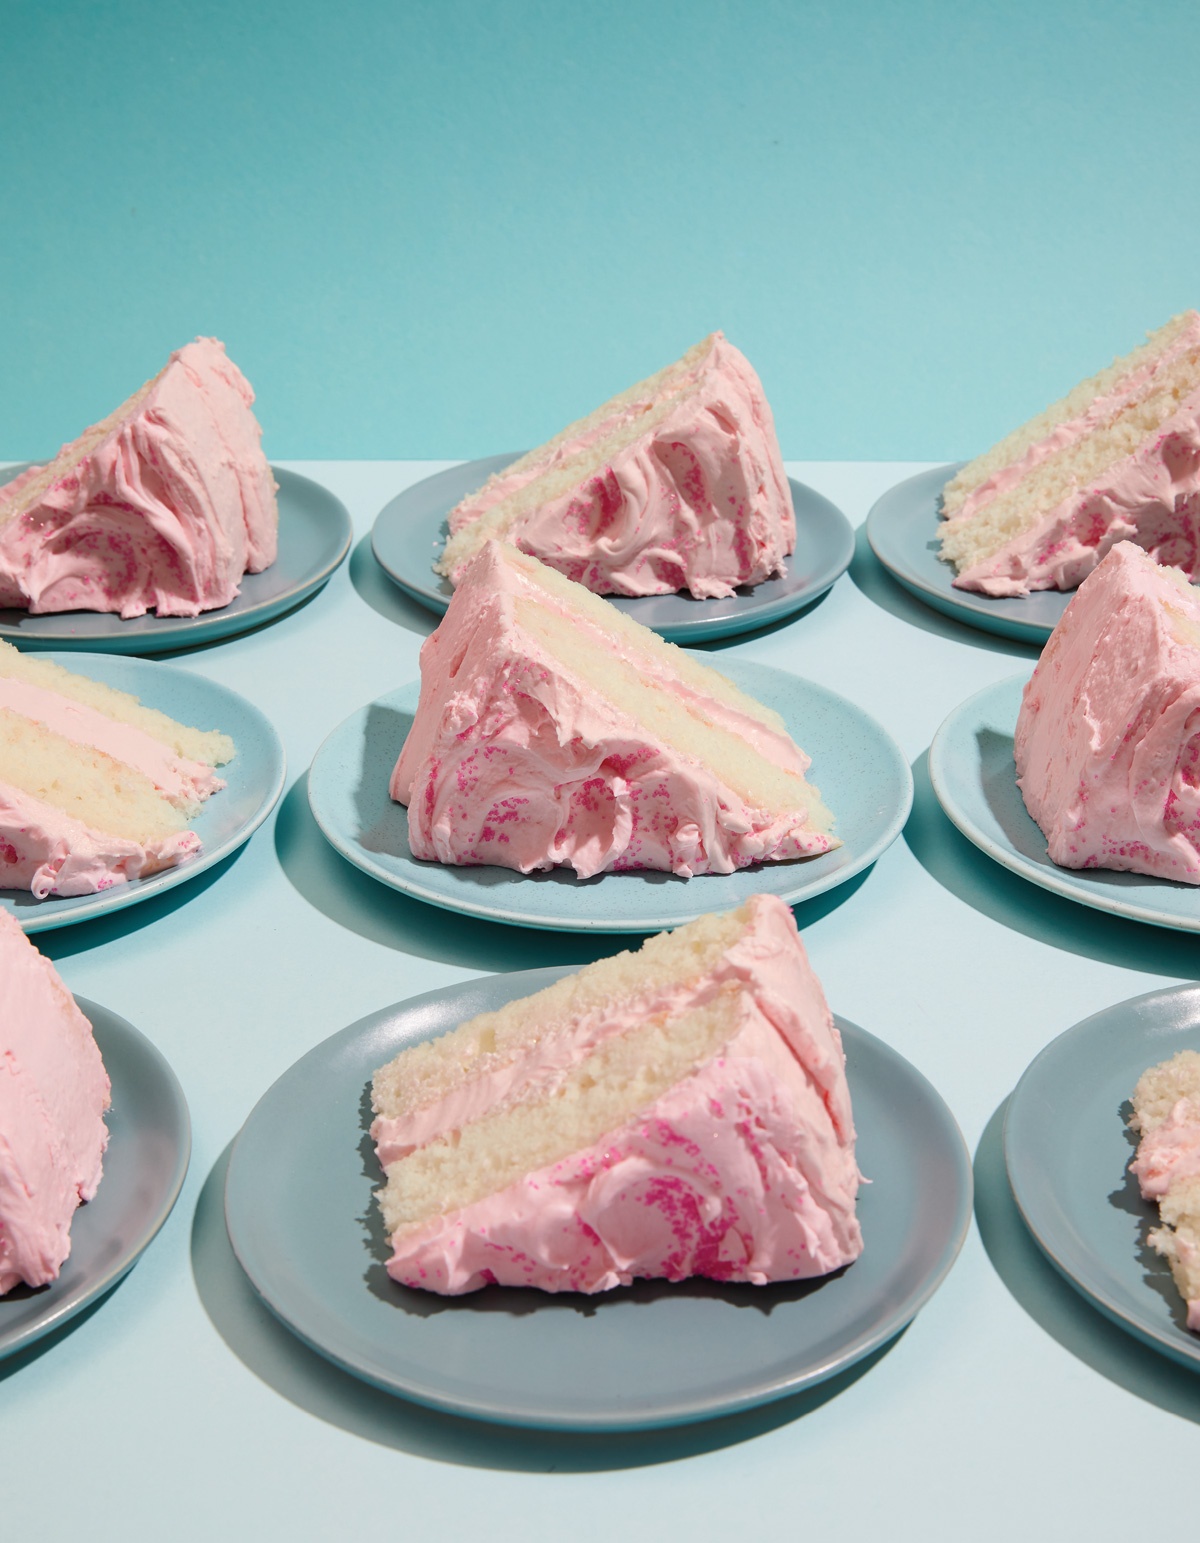 Image of Jessie Sheehan's Silver Cake with Pink Frosting